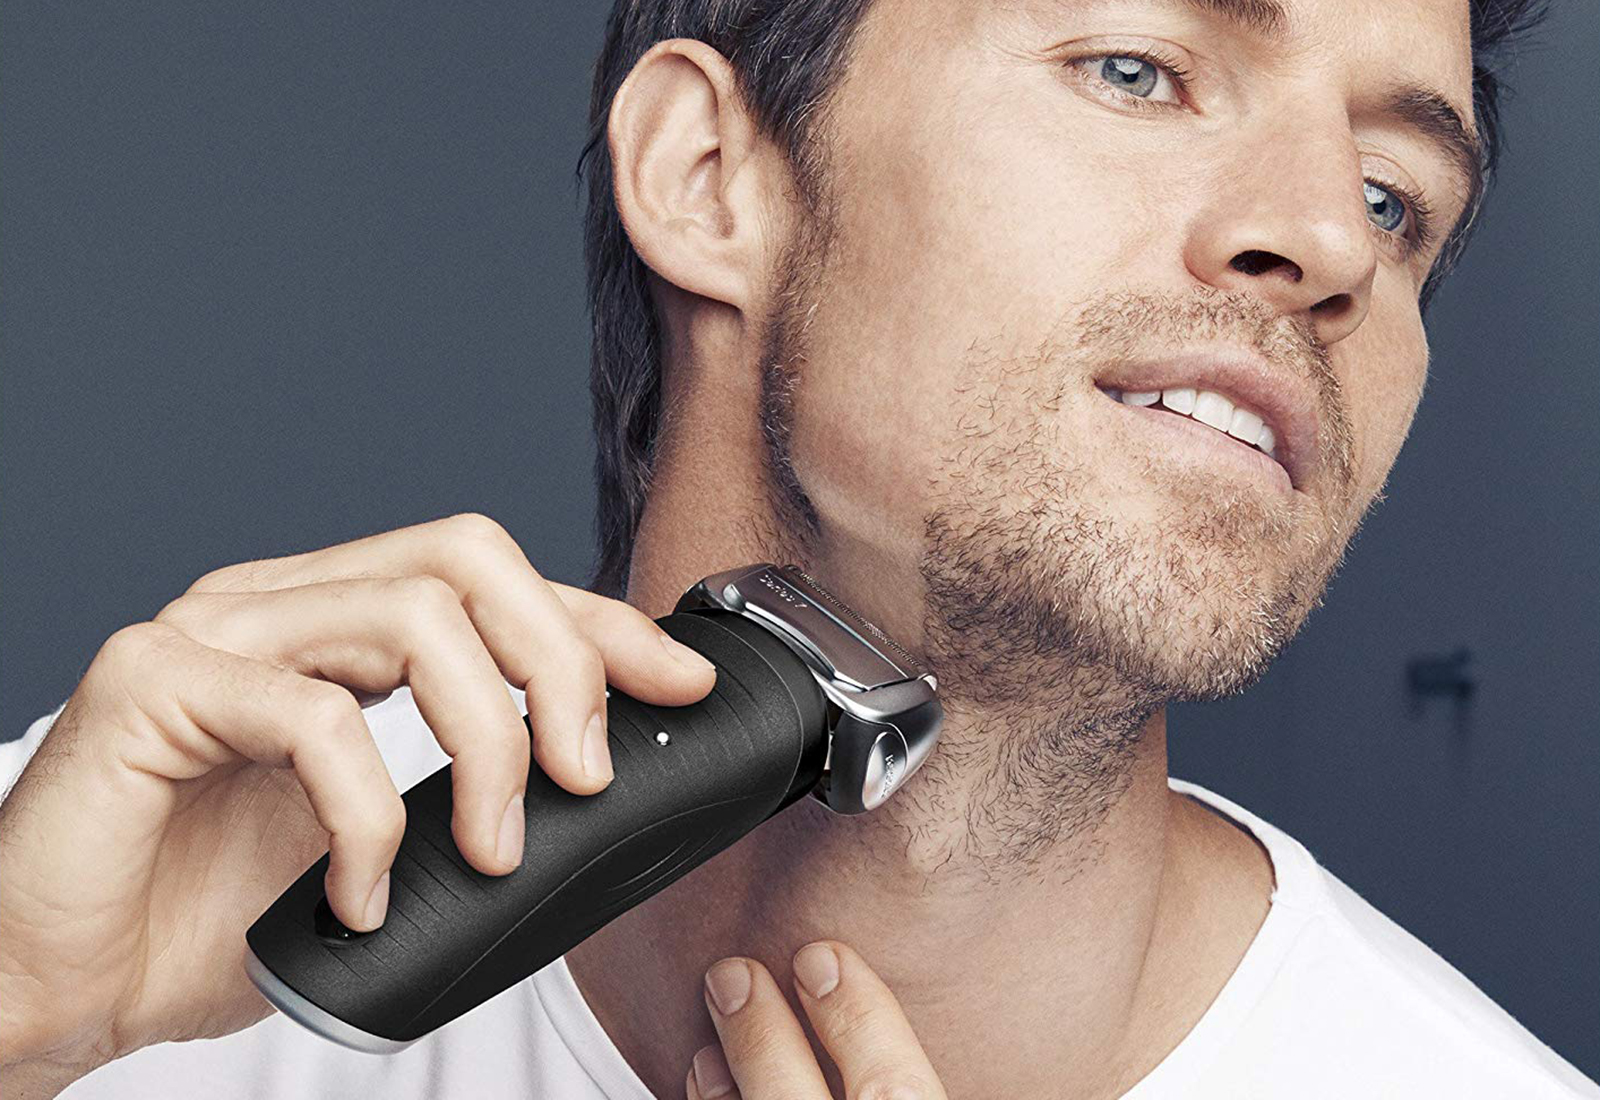 which trimmer gives the closest shave